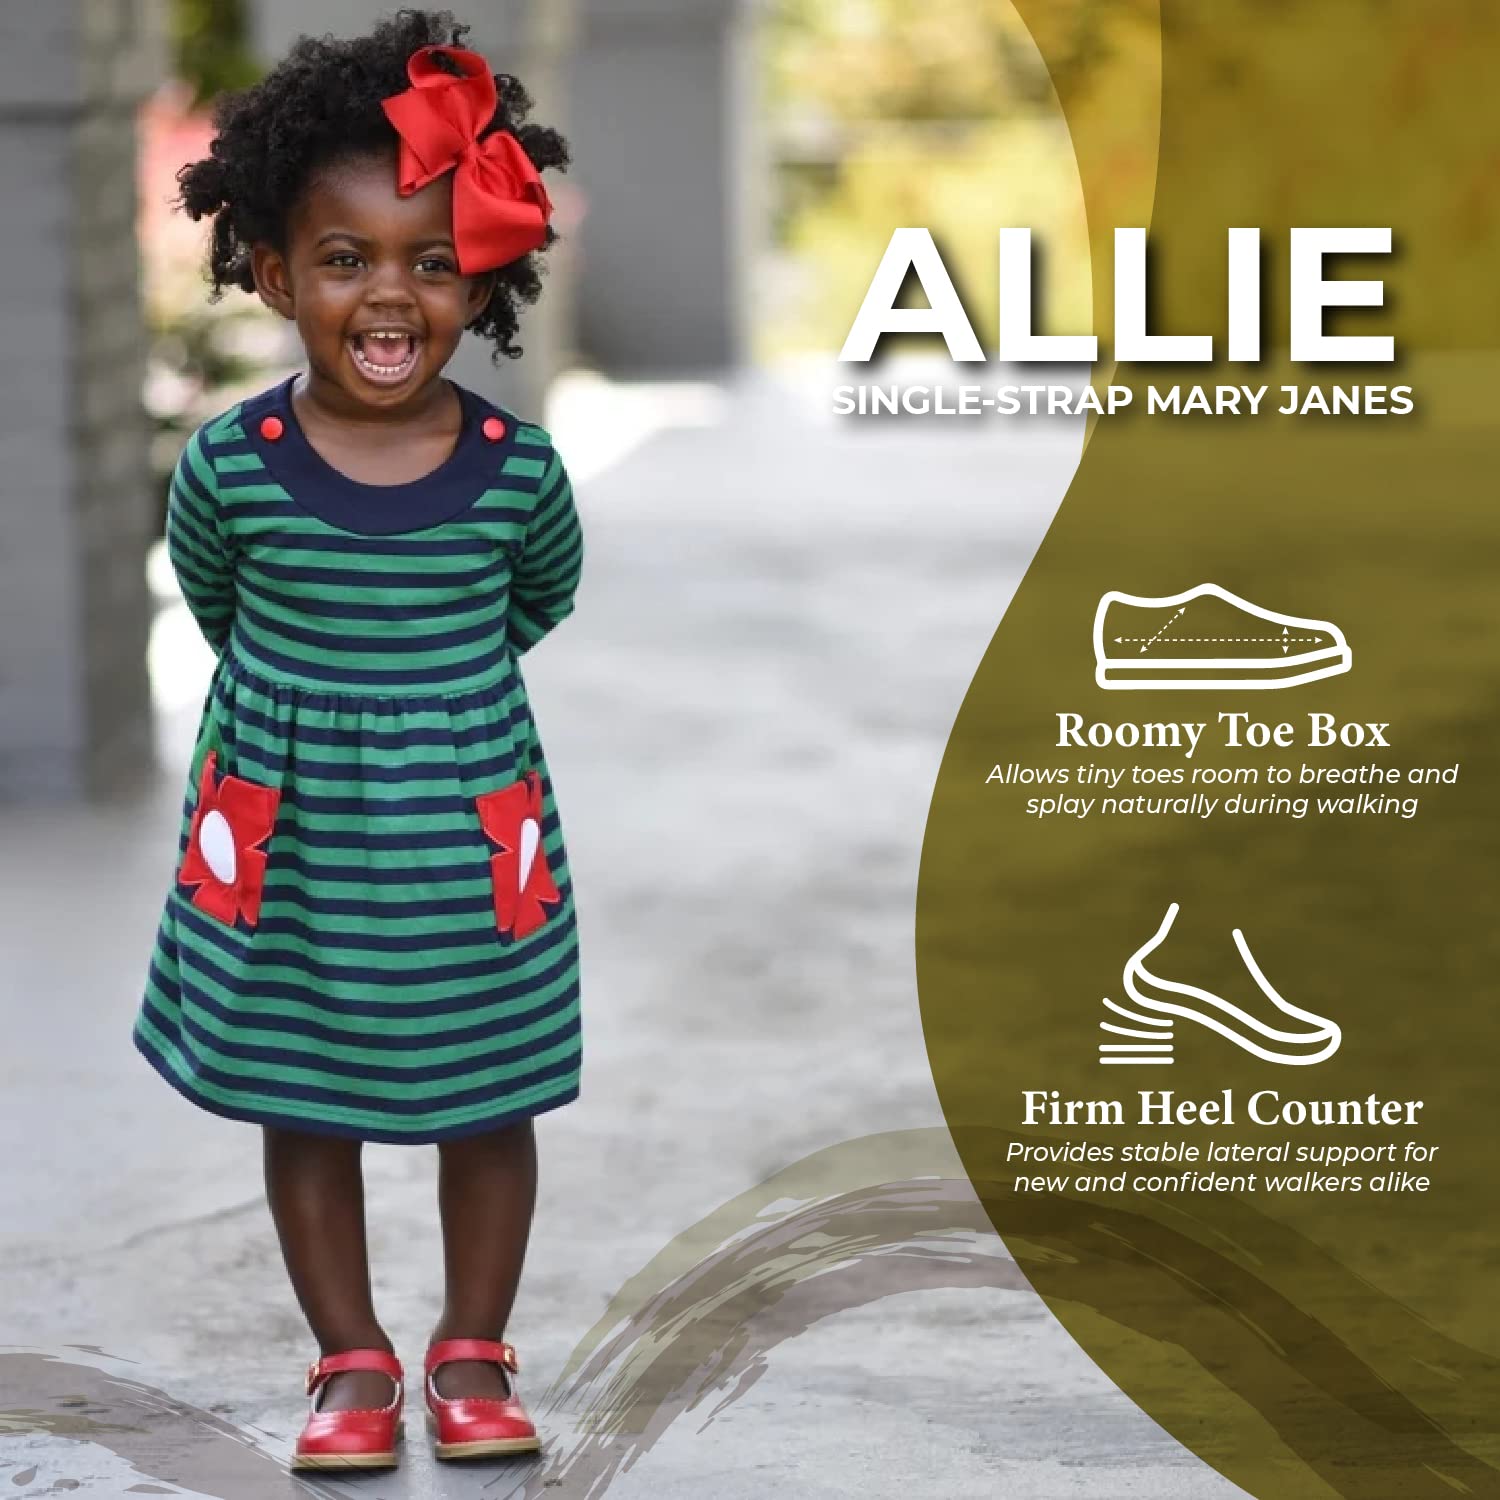 FOOTMATES Allie Leather Mary Jane Girls Party Dress Hard Bottom Shoes with Custom-Fit Insoles, Slip-Resistant Non-Marking Outsoles - for Infants, Toddlers, Little Kids, Ages 0-8